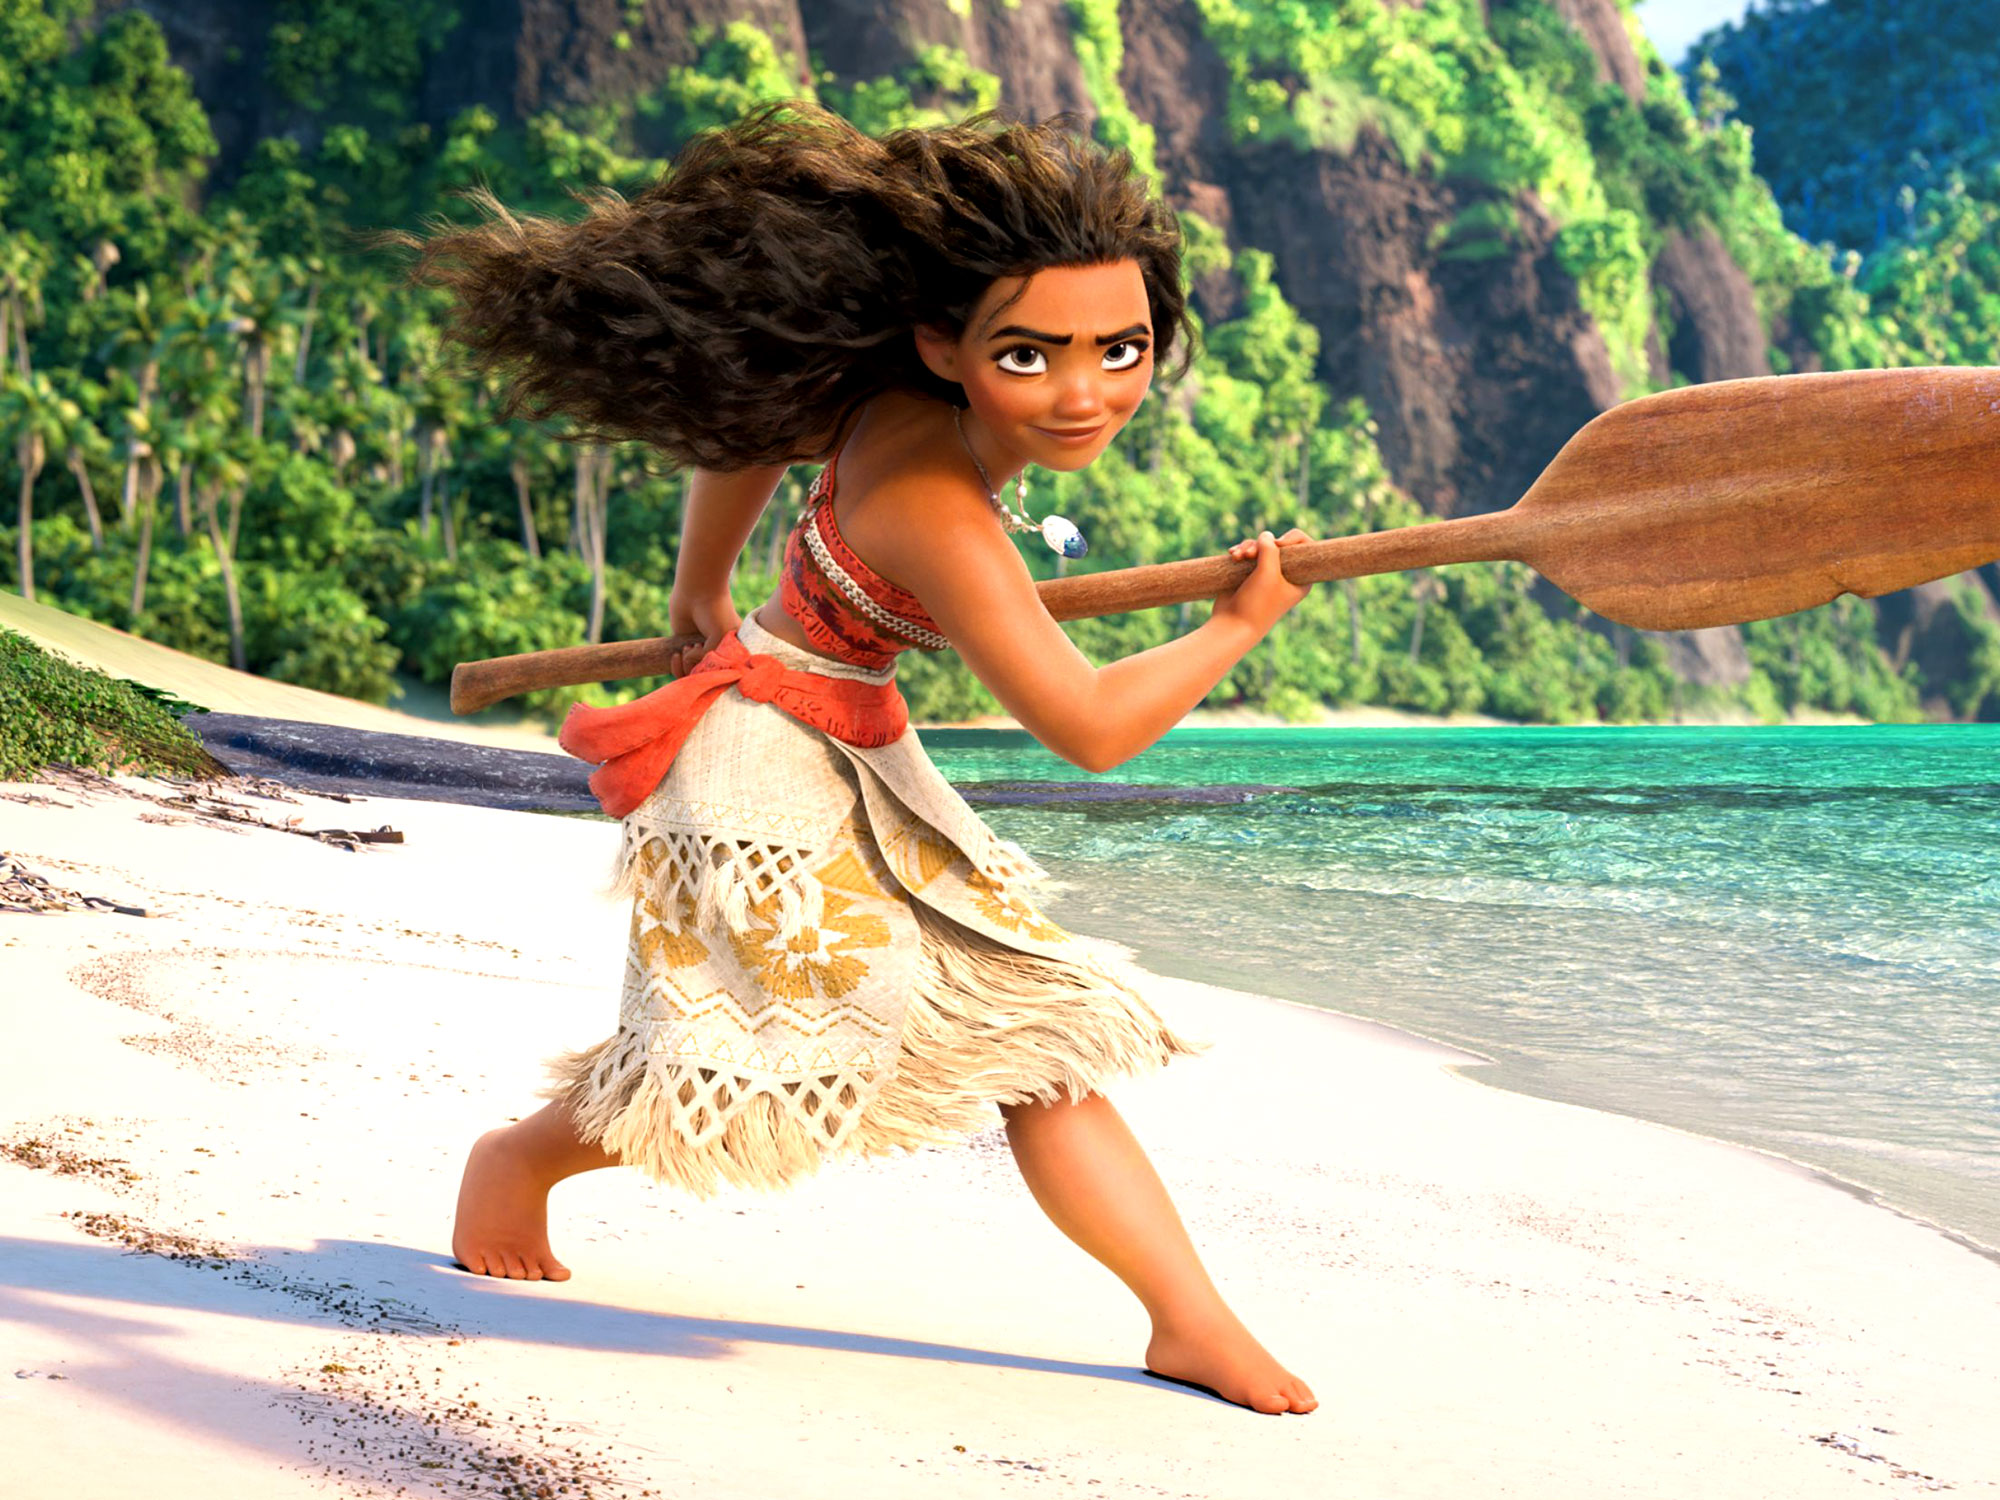 Princess Moana seeks our adventure with a paddle in hand.